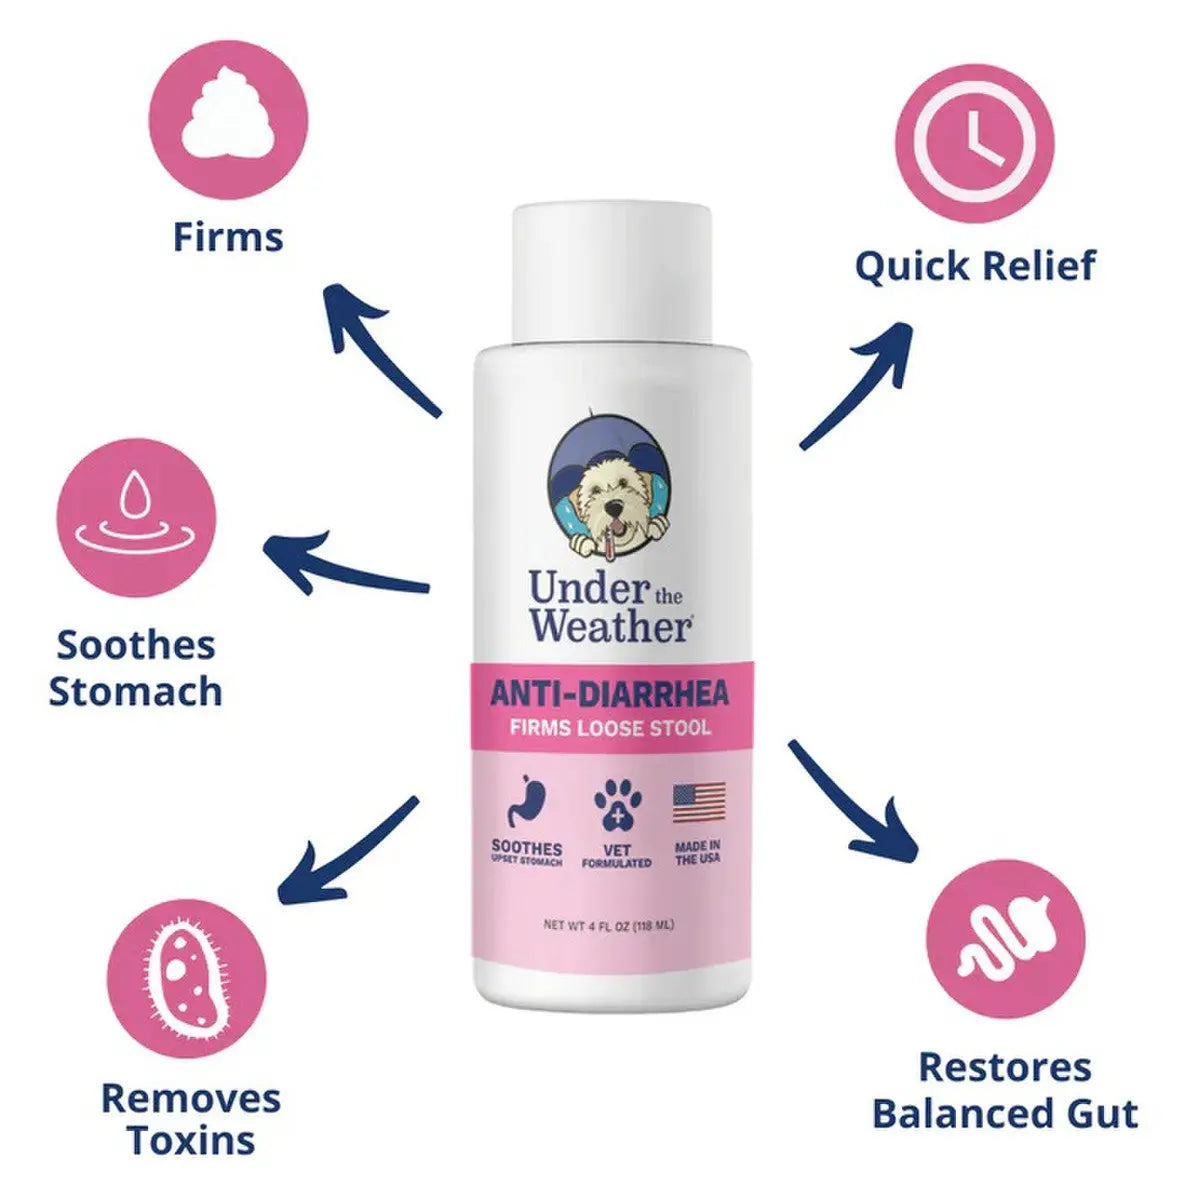 Under the Weather Anti-Diarrhea Liquid for Dogs 4oz Under the Weather